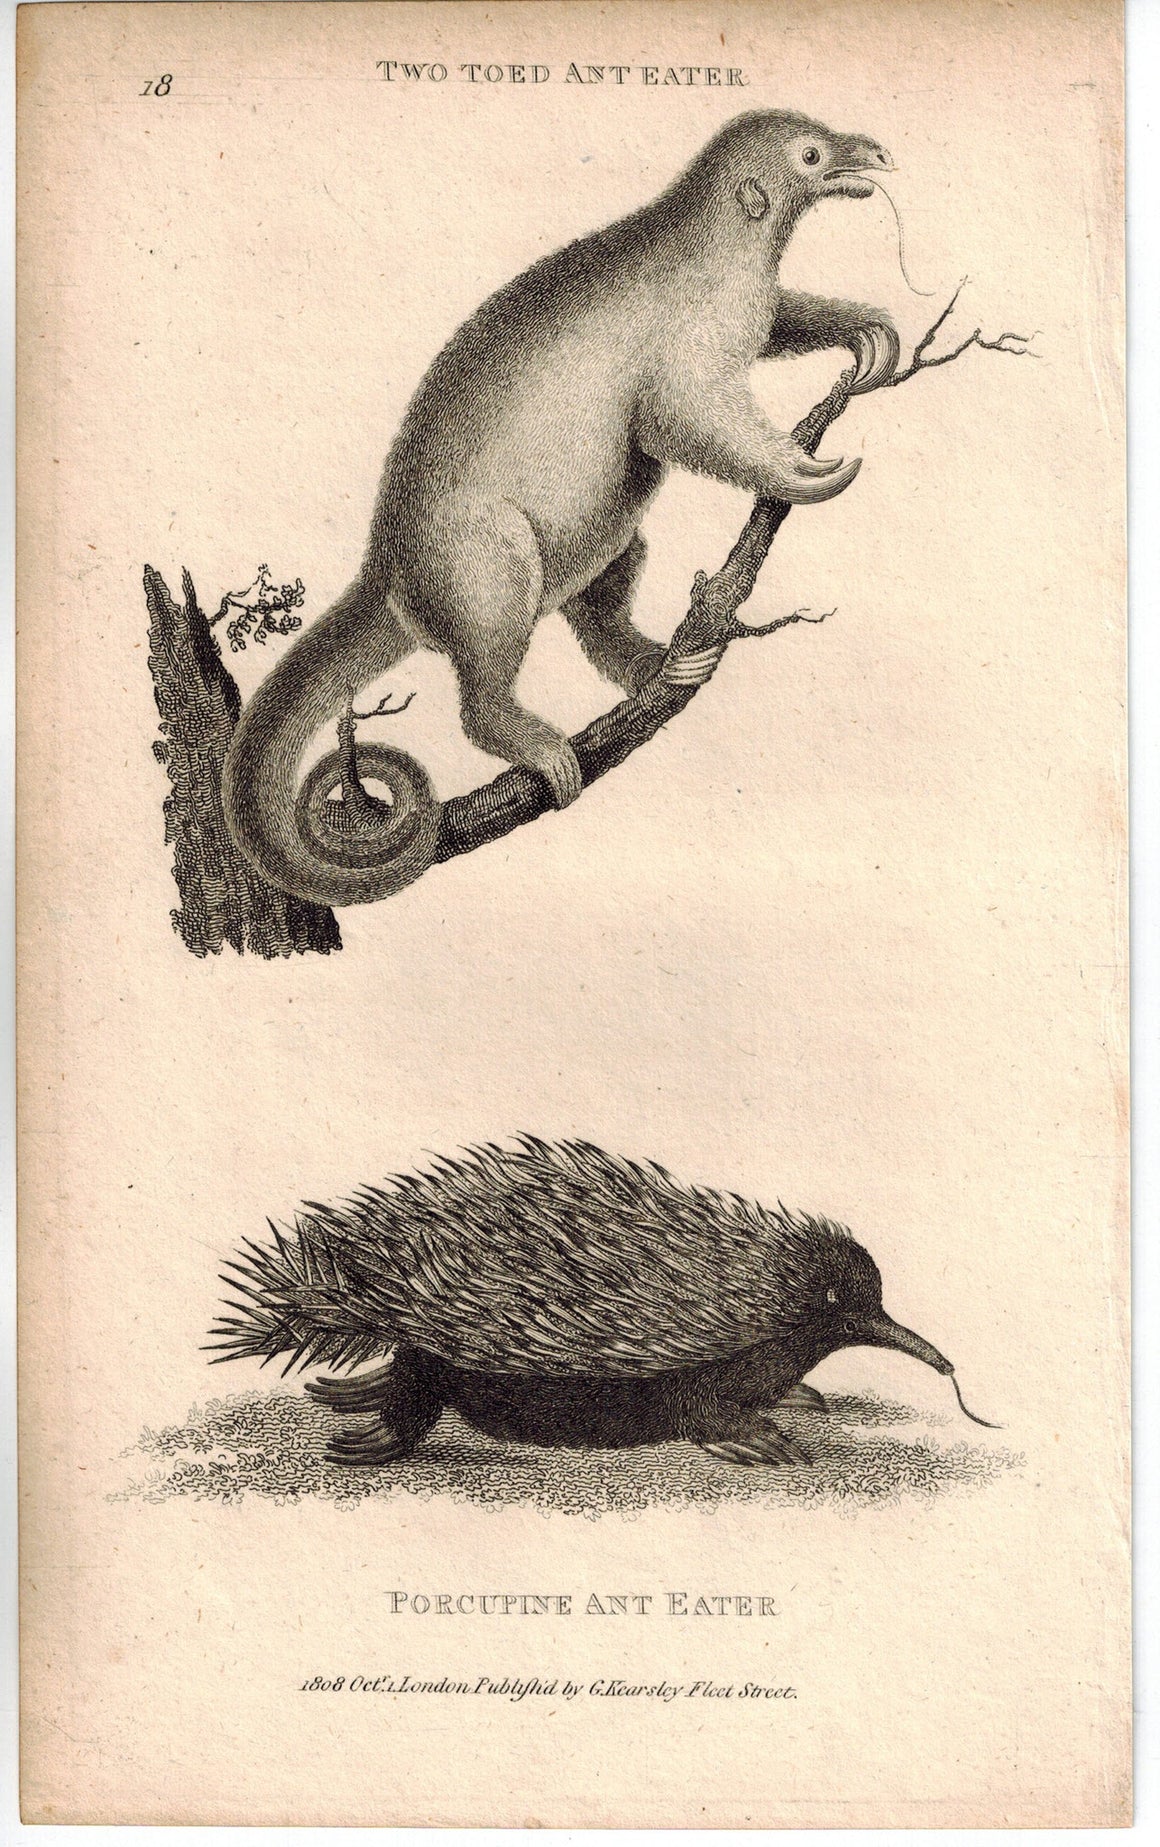 Two Toed Anteater & Porcupine Print 1809 George Shaw Original Engraving